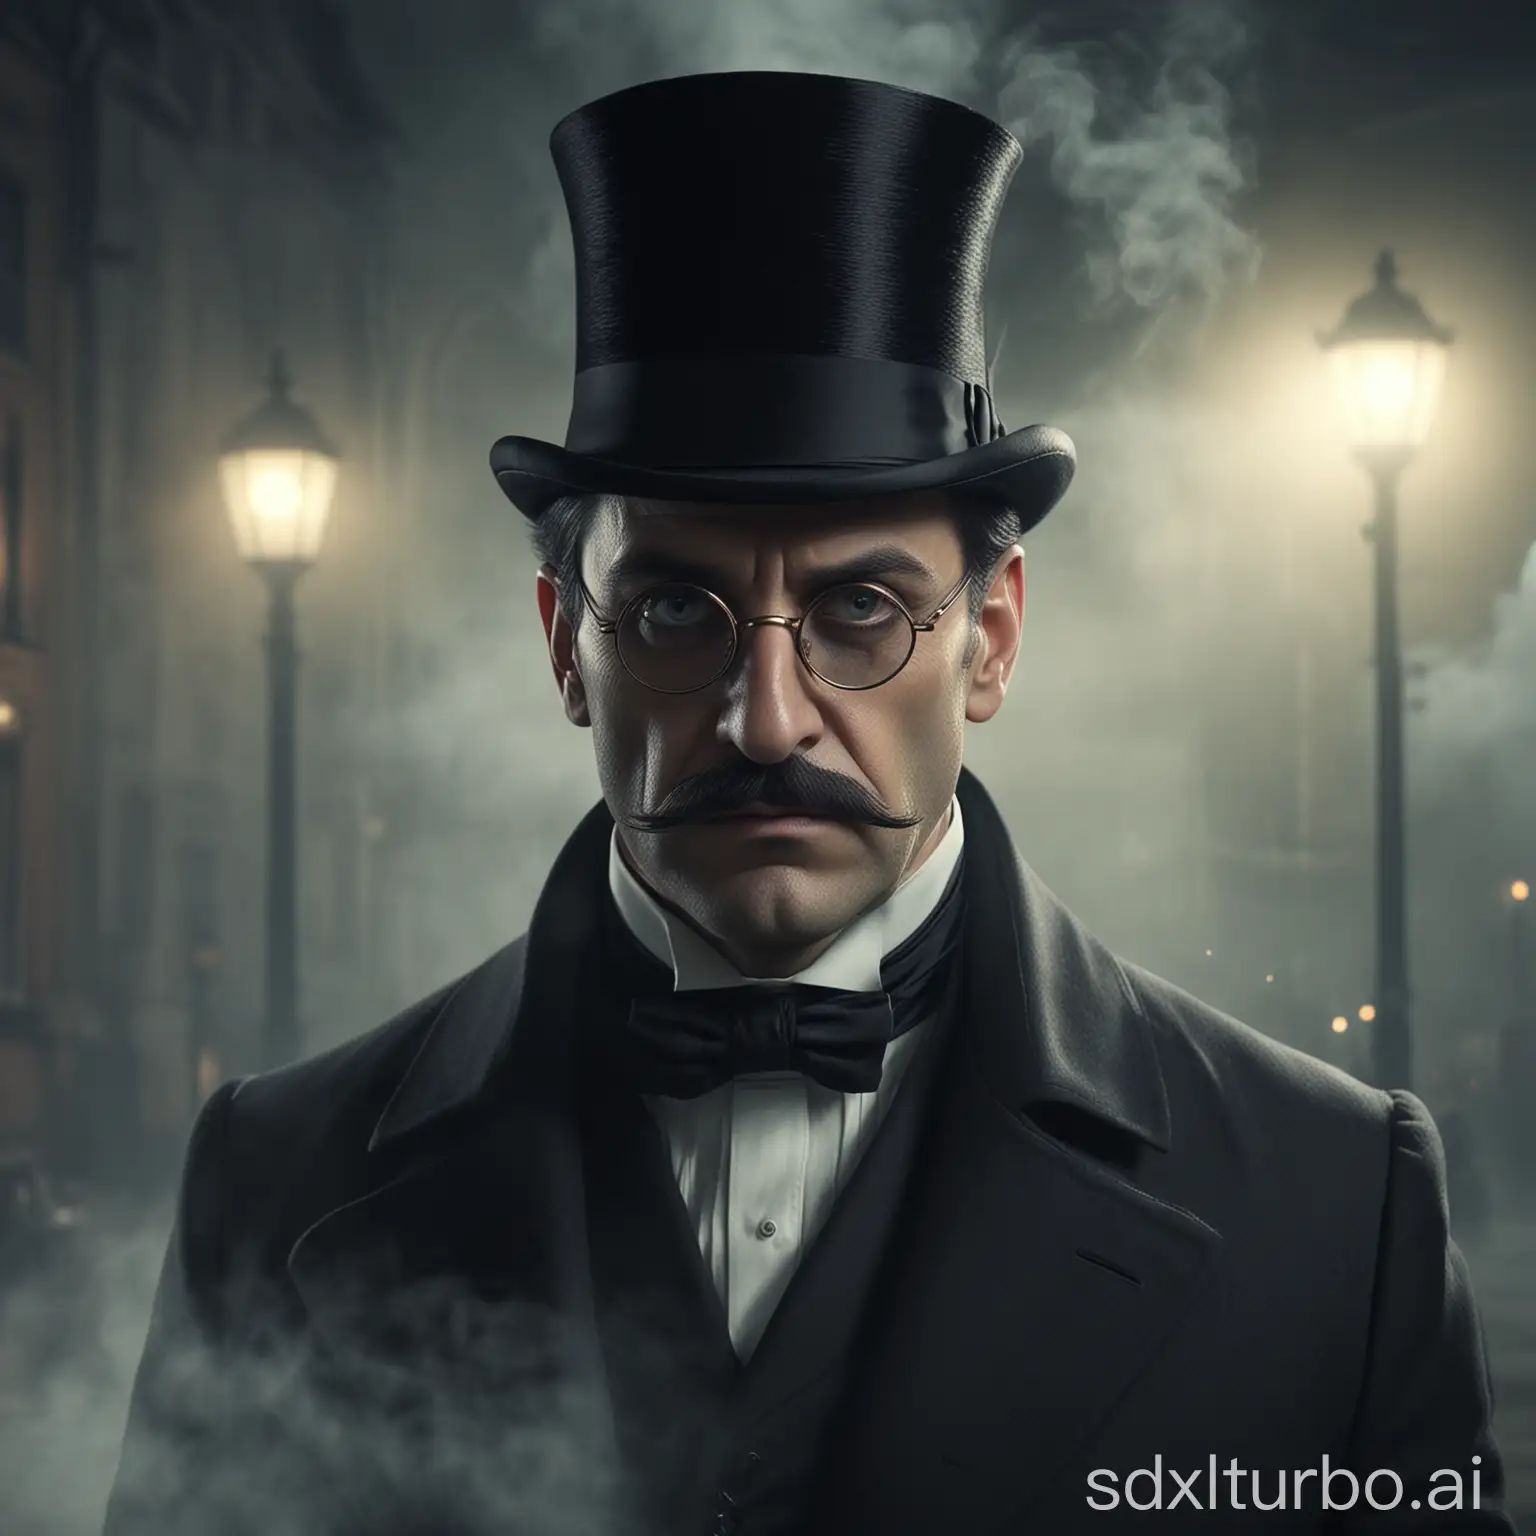 Cinematic-Hyperrealistic-Portrait-of-a-Sinister-French-Gentleman-with-Monocle-in-Foggy-Ambiance